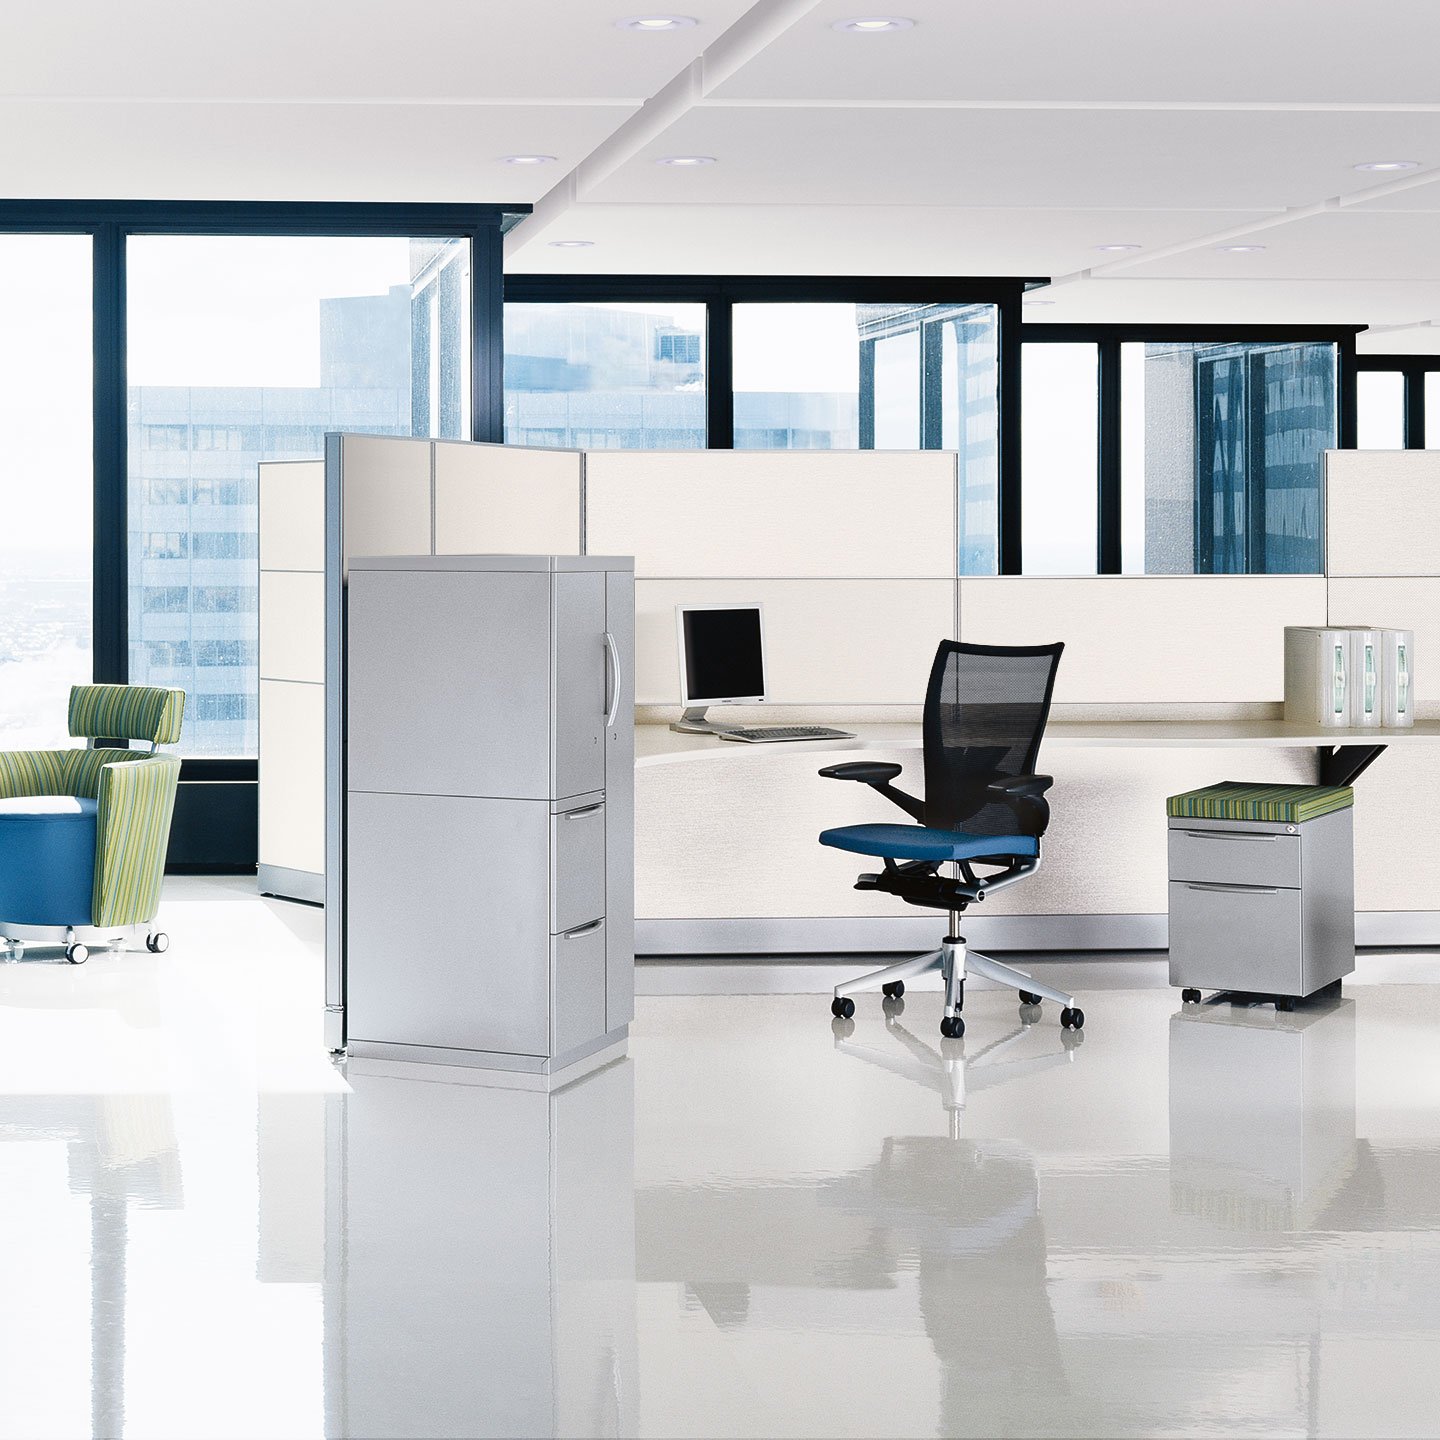 Haworth Unigroup Too Workspace in open office area with white desk and grey aluminum storage space with windows over looking city